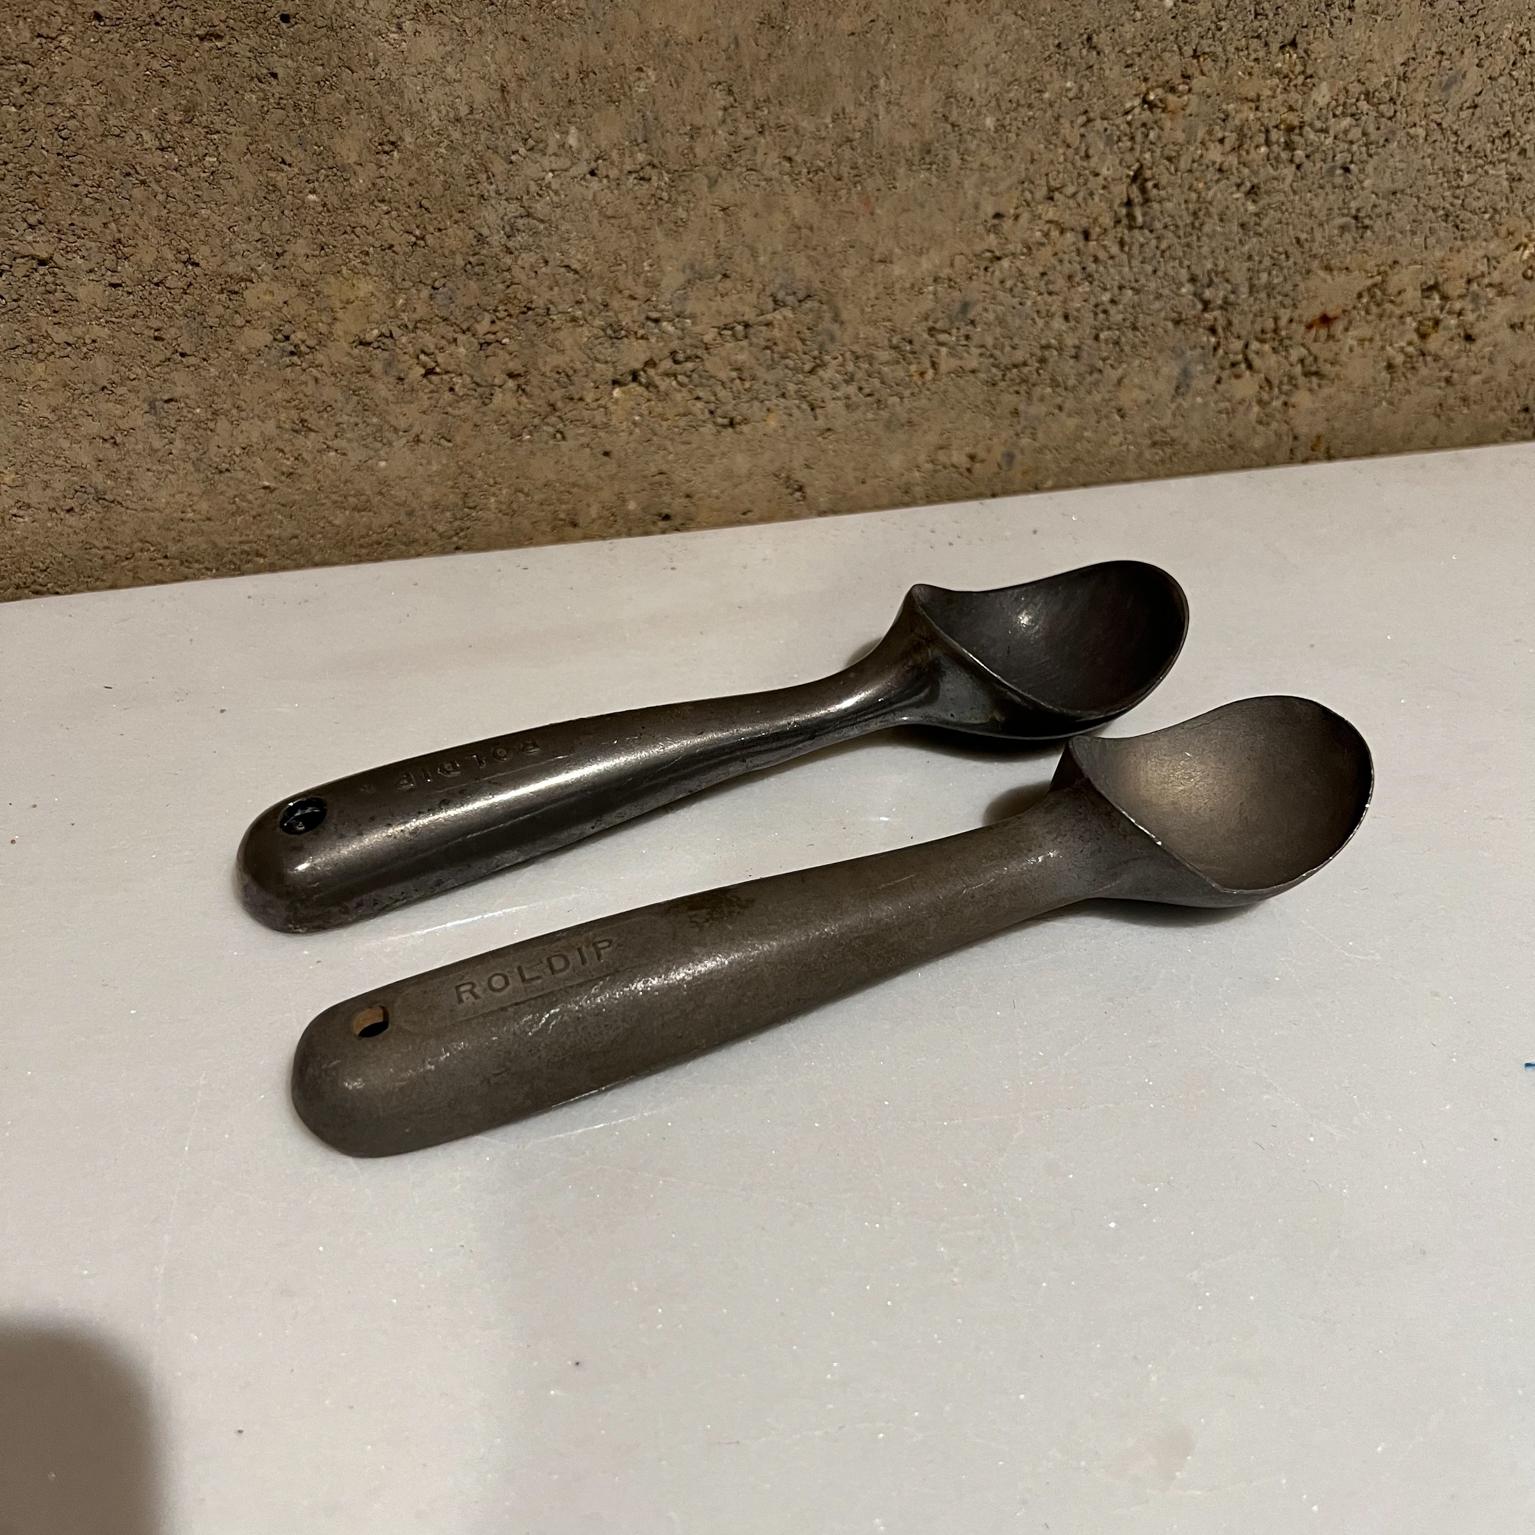 Vintage Roldip ice cream scooper Ohio Modern Airstream style USA
Measures: 7.5 length x 1.75 width x 1.25 tall
Maker stamped
Preowned original unrestored vintage condition
Refer to images please.


